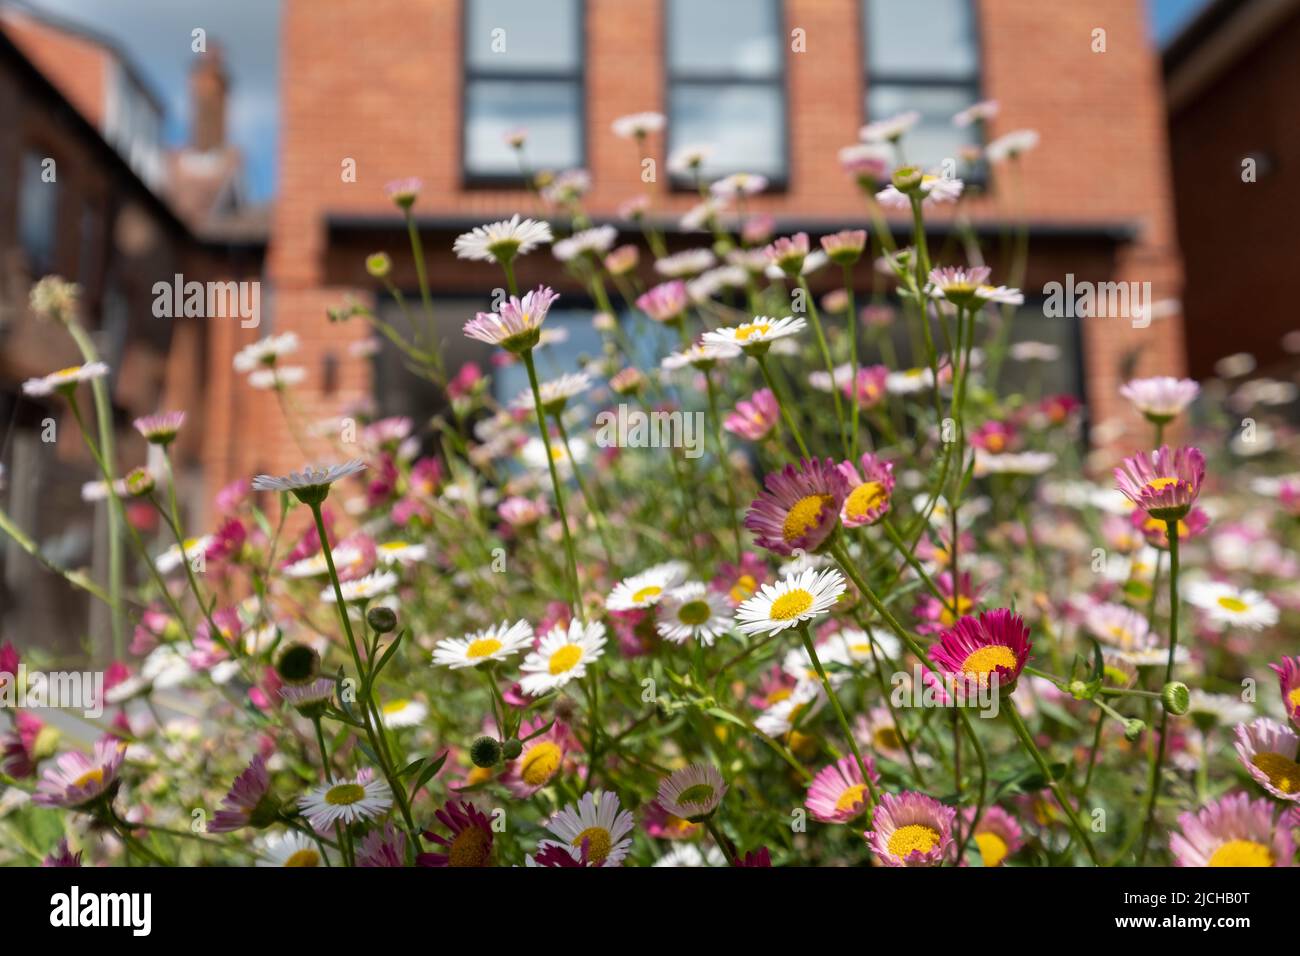 Garden in Pinner, UK, with new red brick extension and three tall windows behind. Rock garden with Mexican daisies, Erigeron Karvinskianus in front. Stock Photo